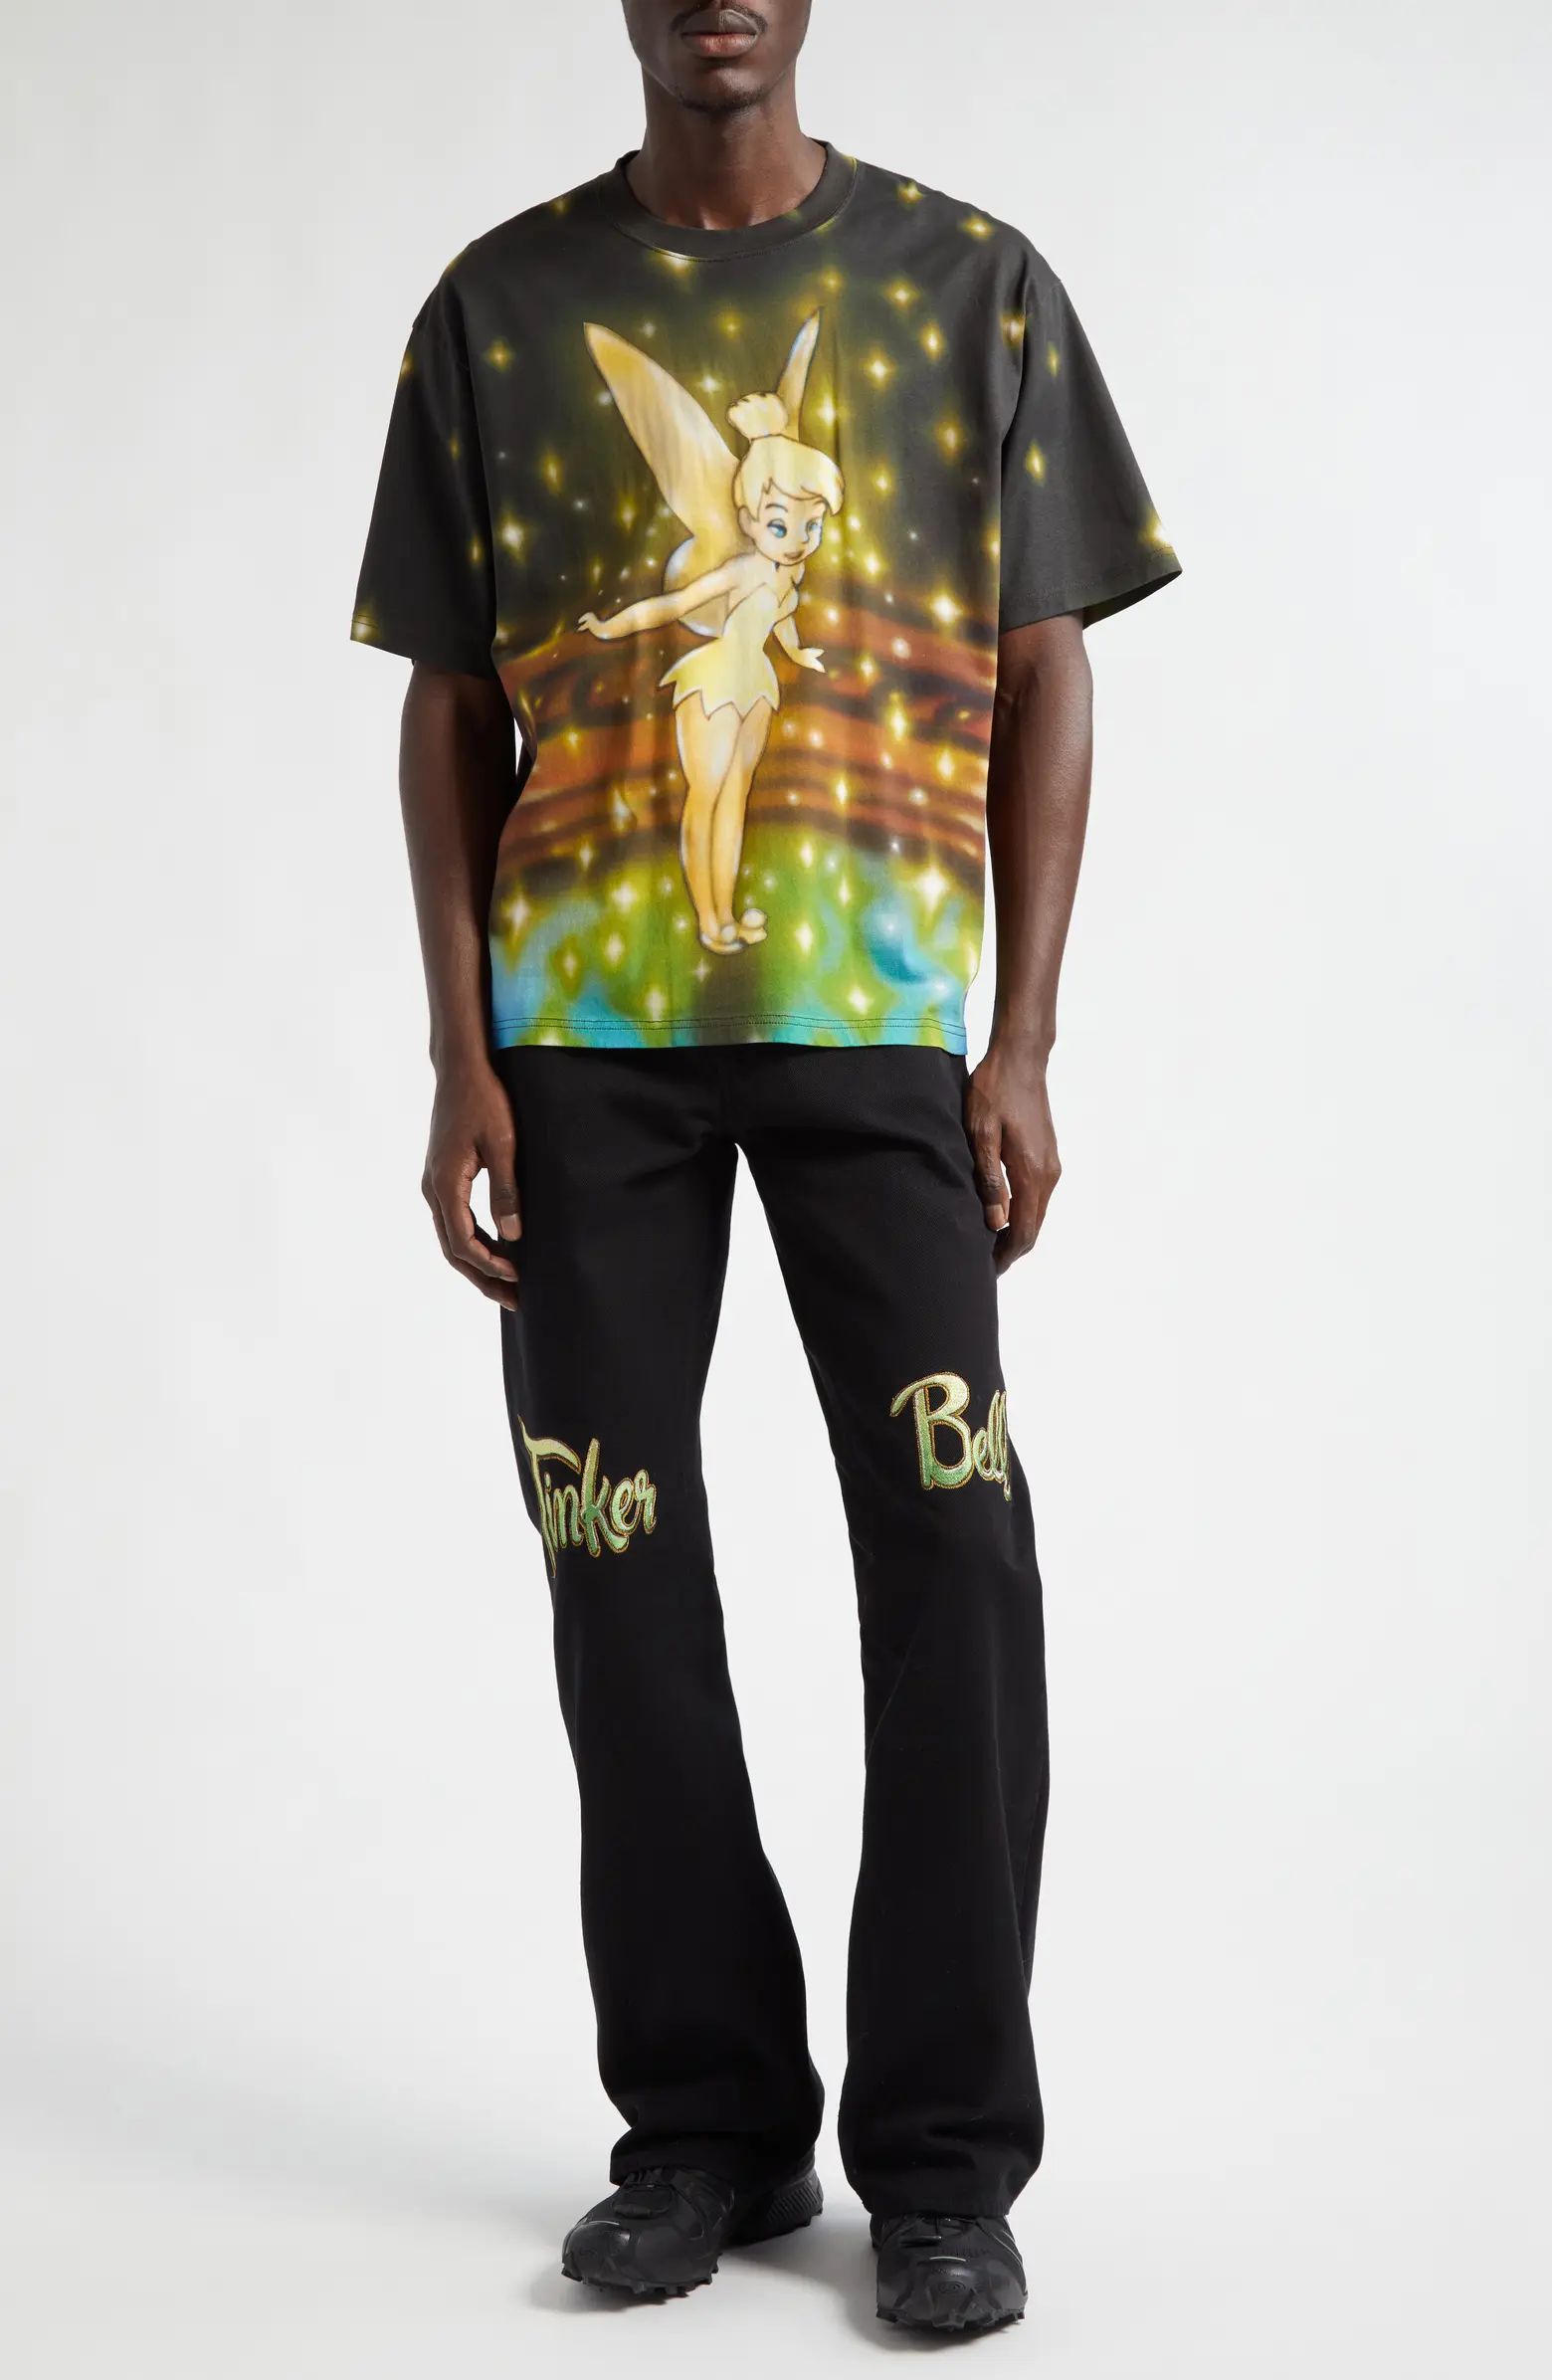 STOCKHOLM SURFBOARD CLUB Airbrush Tinker Bell Organic Cotton Graphic T-Shirt | Nordstrom | Nordstrom